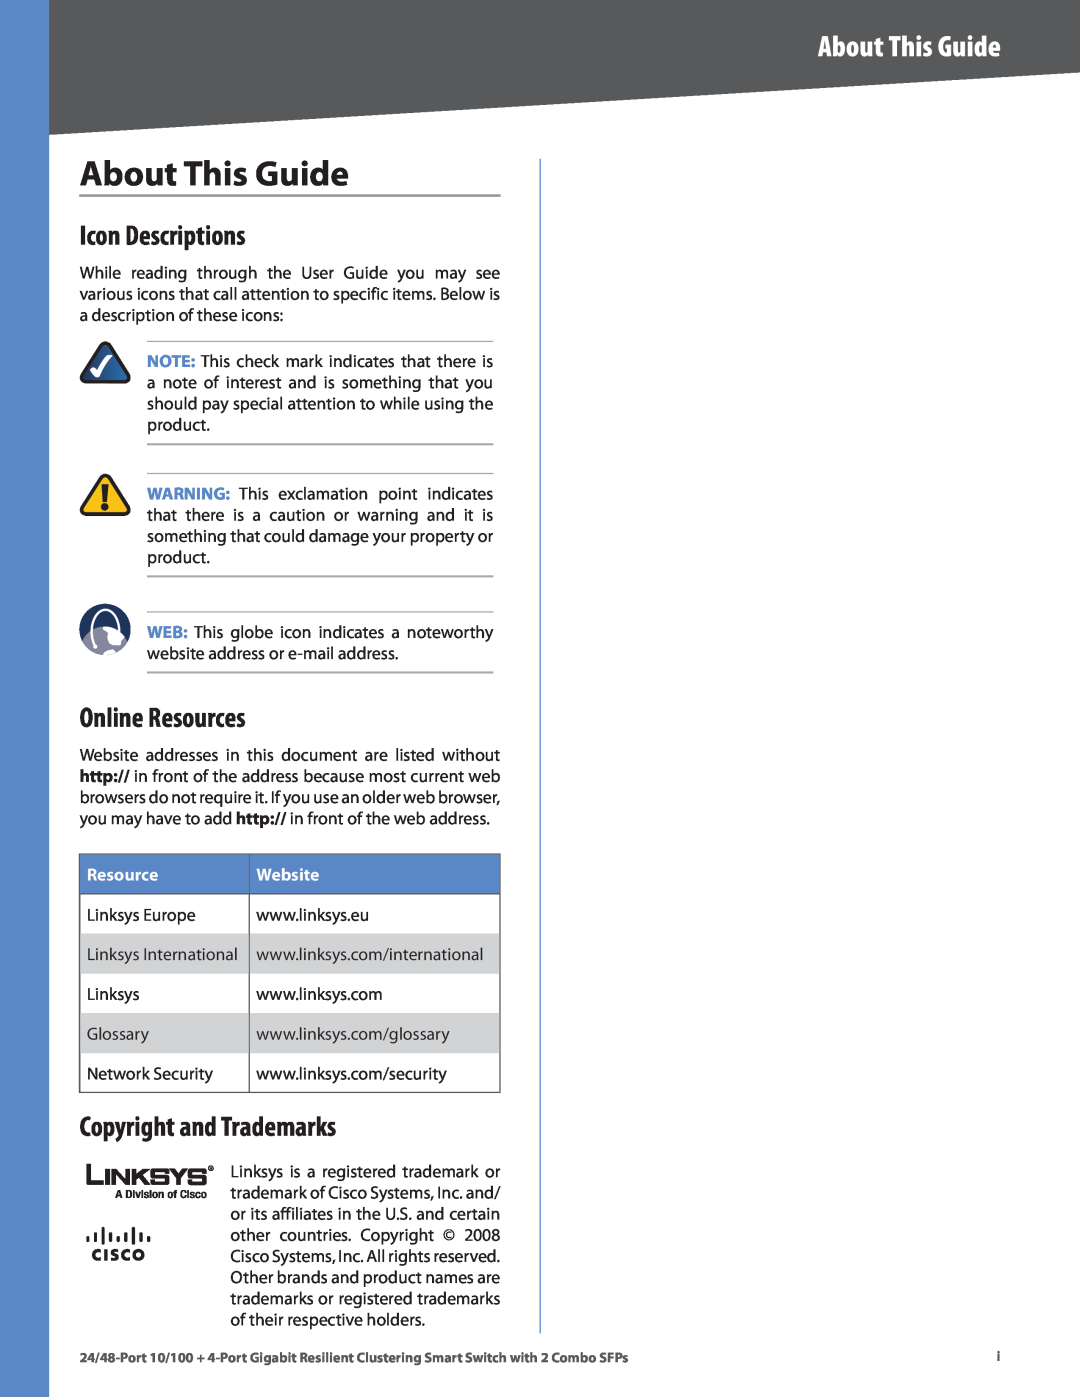 Linksys SLM248G4S (G5) manual About This Guide, Icon Descriptions, Online Resources, Copyright and Trademarks, Website 